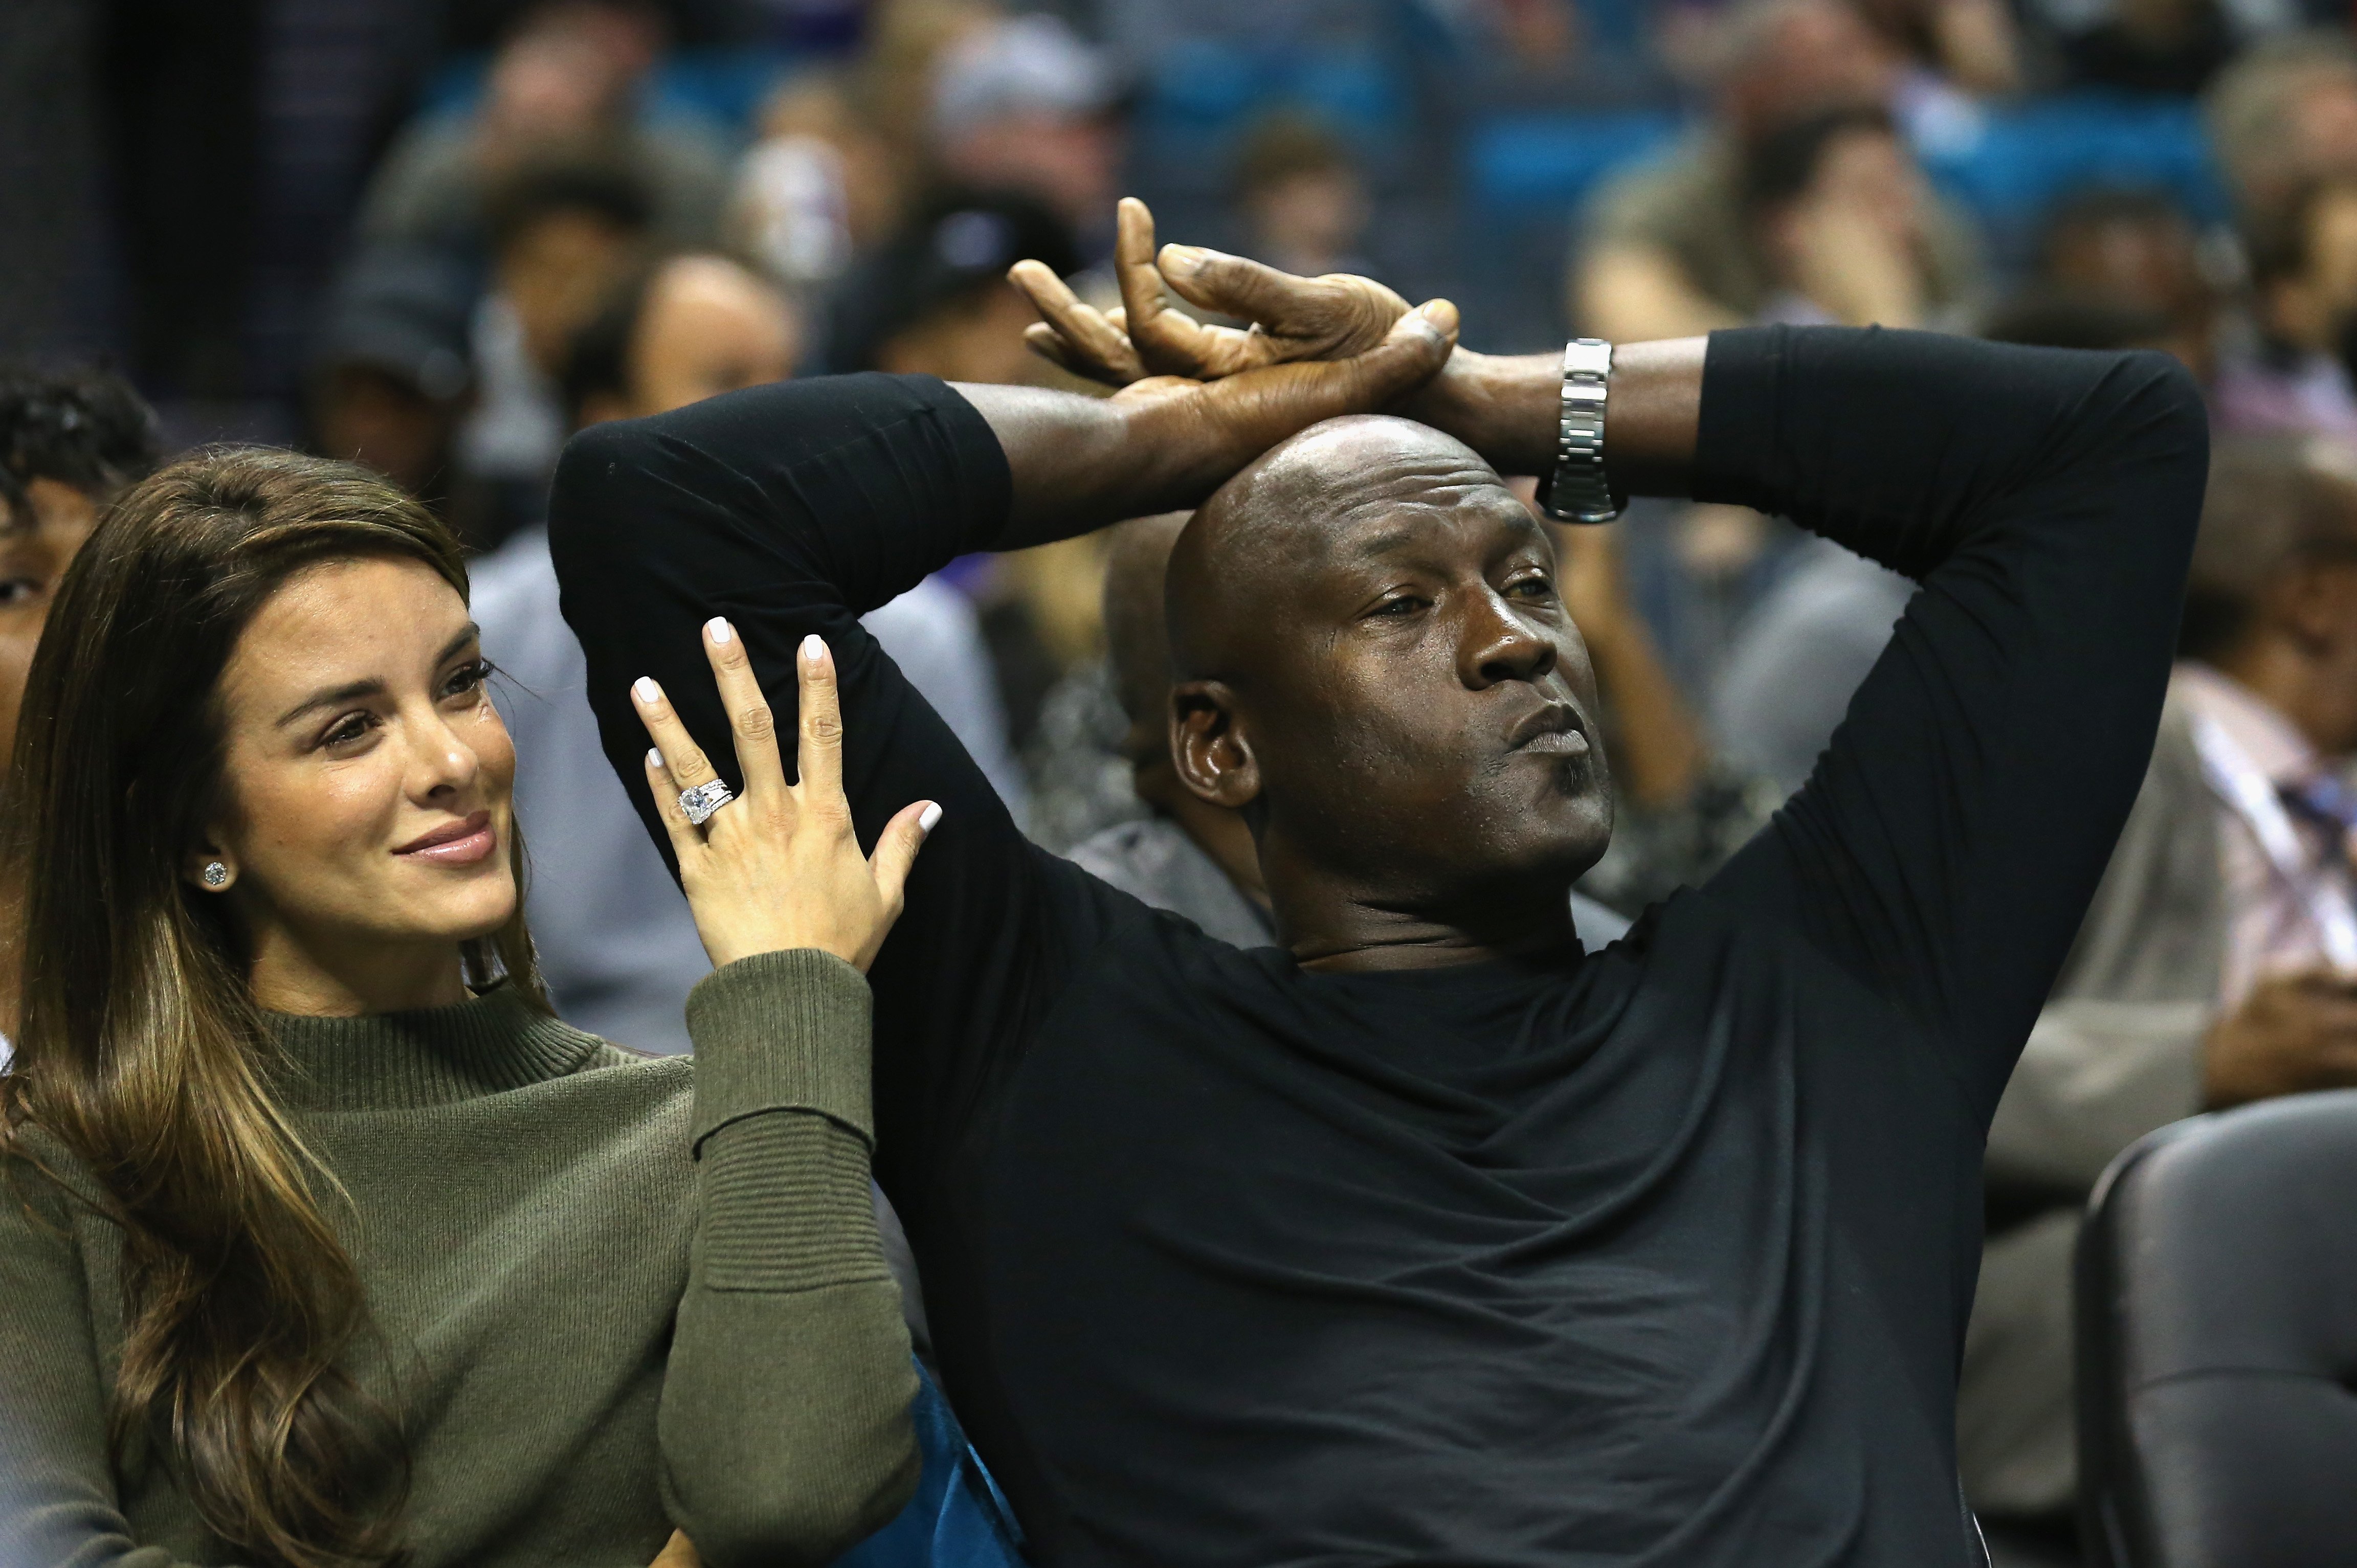 Yvette Prieto and Michael Jordan during a Charlotte Hornets vs. Atlanta Hawks game at Time Warner Cable Arena on November 1, 2015. | Source: Getty Images